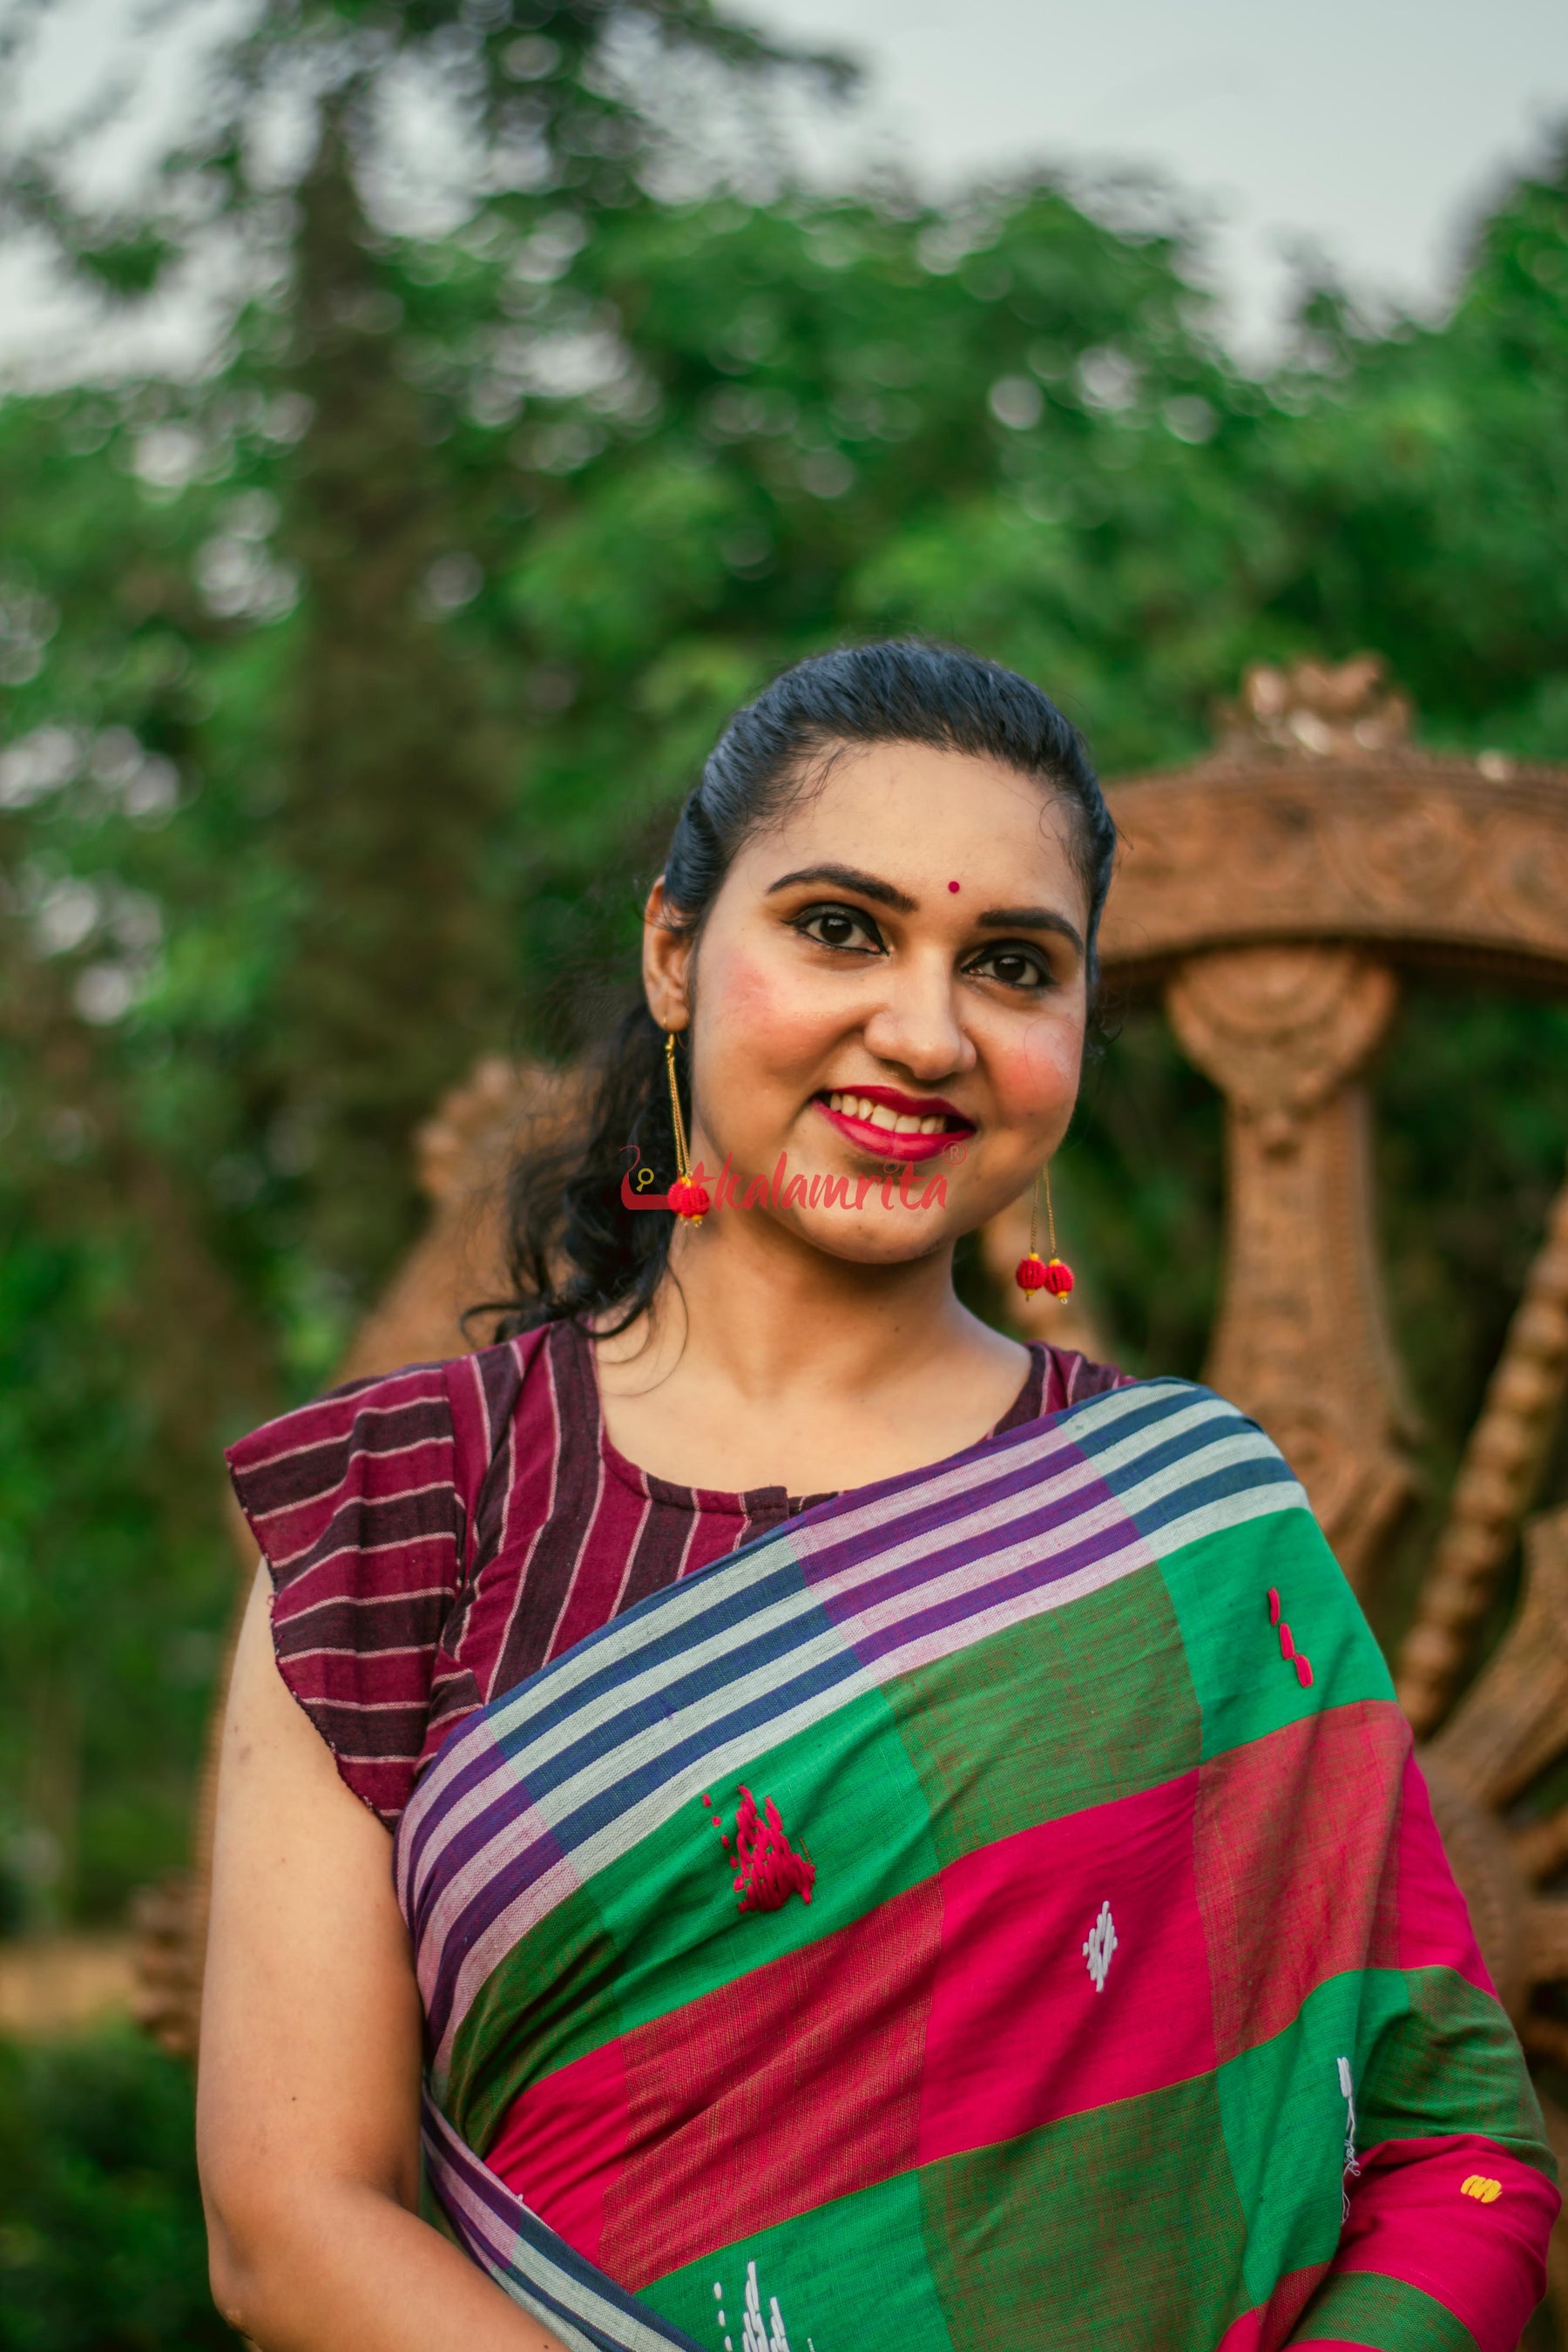 Thoughts On Santhal Saree